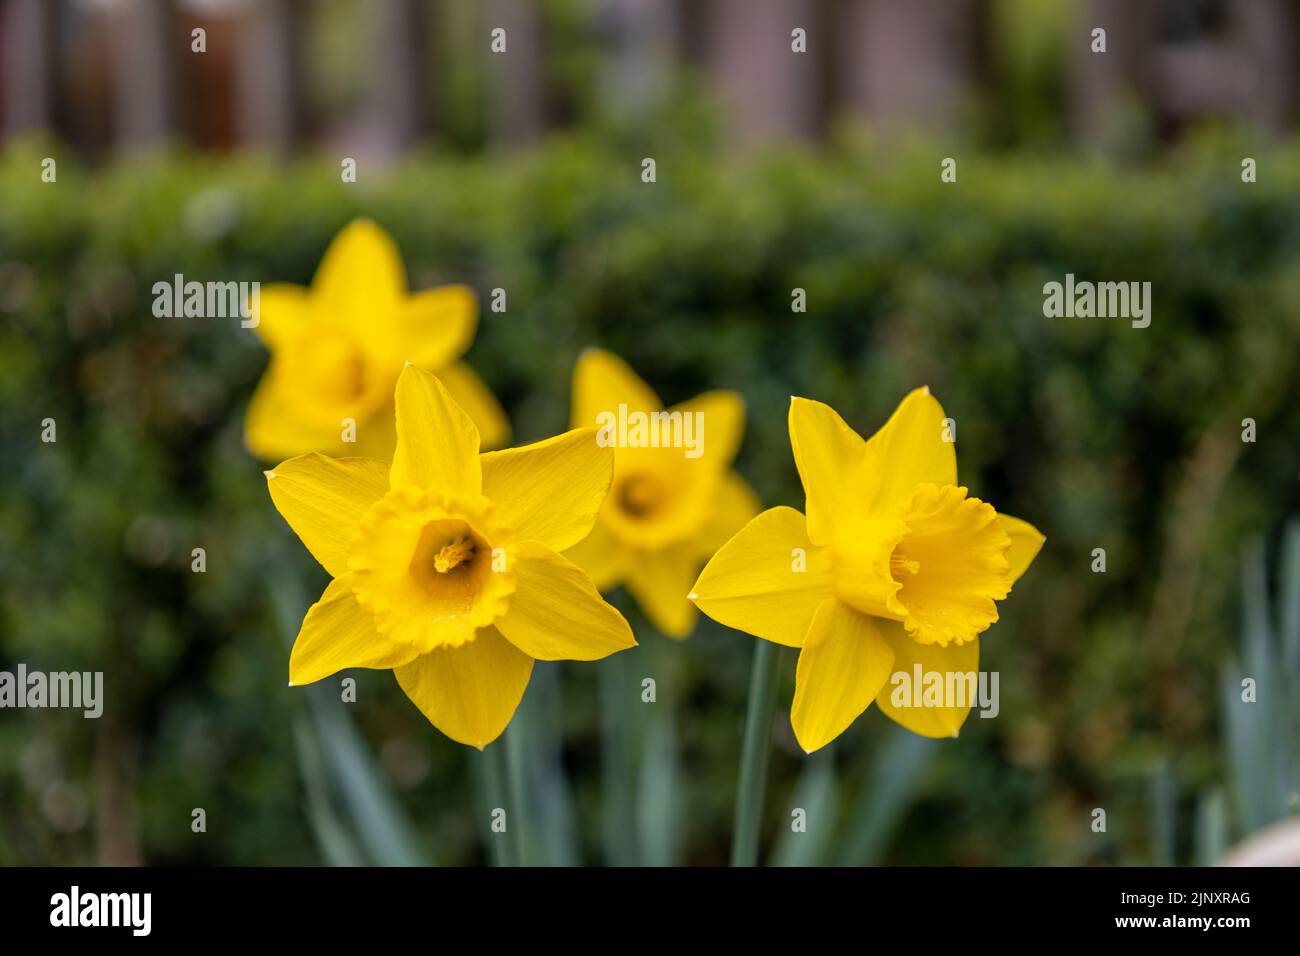 Selective focus, close up on yellow daffodil flowers. more flowers out of focus in the background. Stock Photo